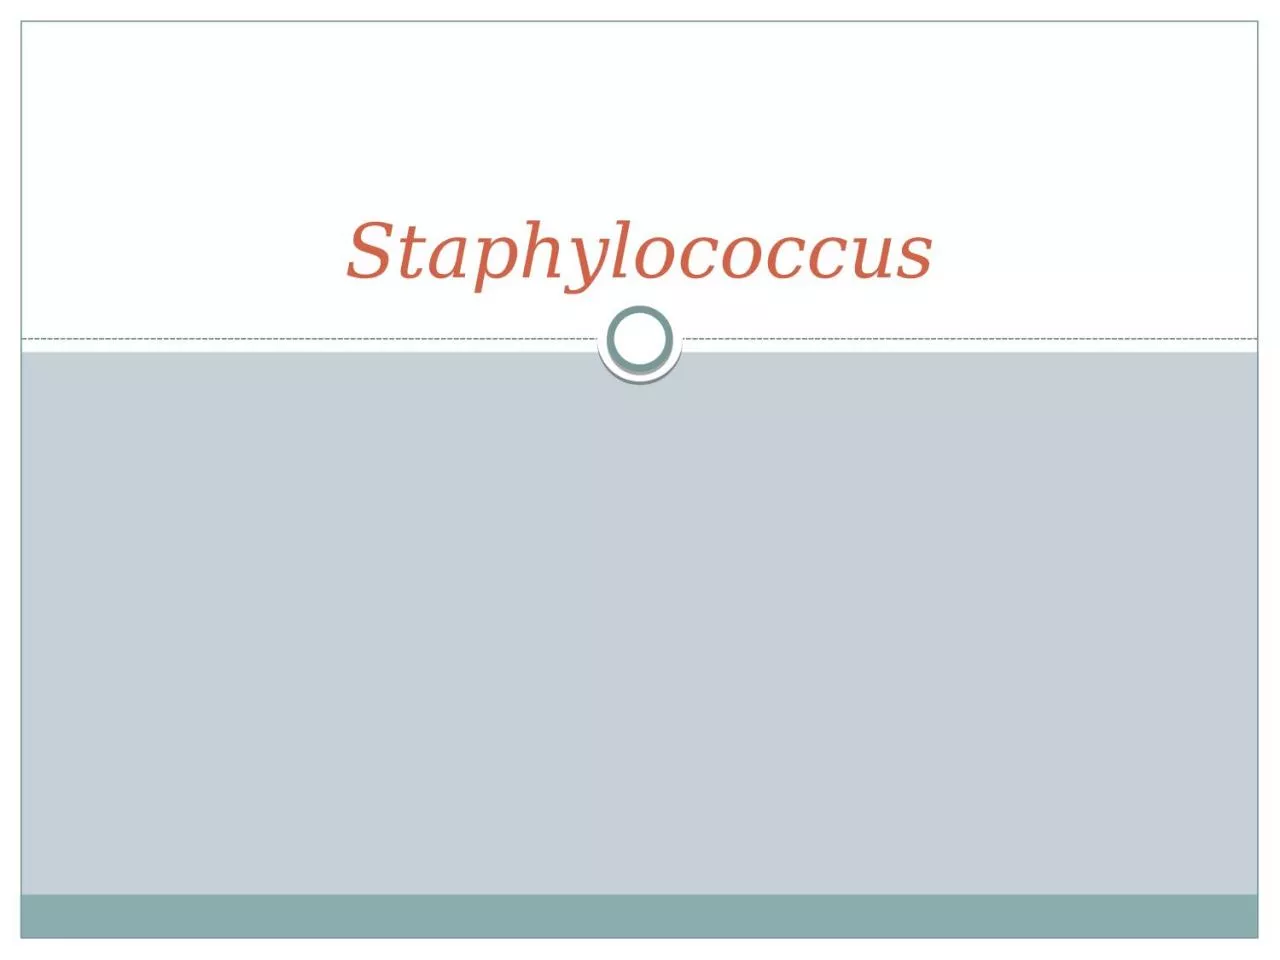 Staphylococcus Classification